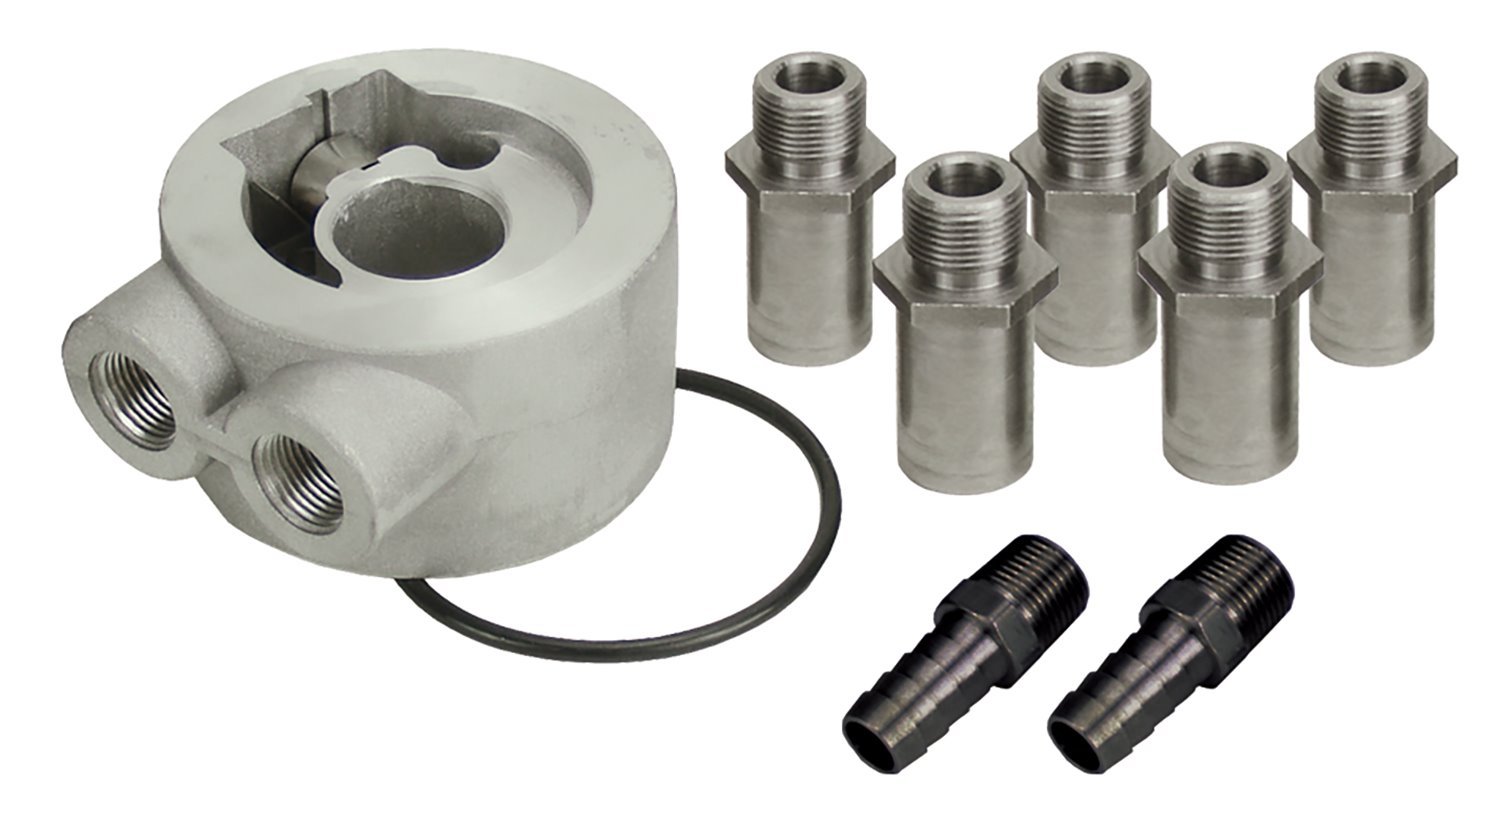 Thermostatic Sandwich Adapter Kit Fits most applications with